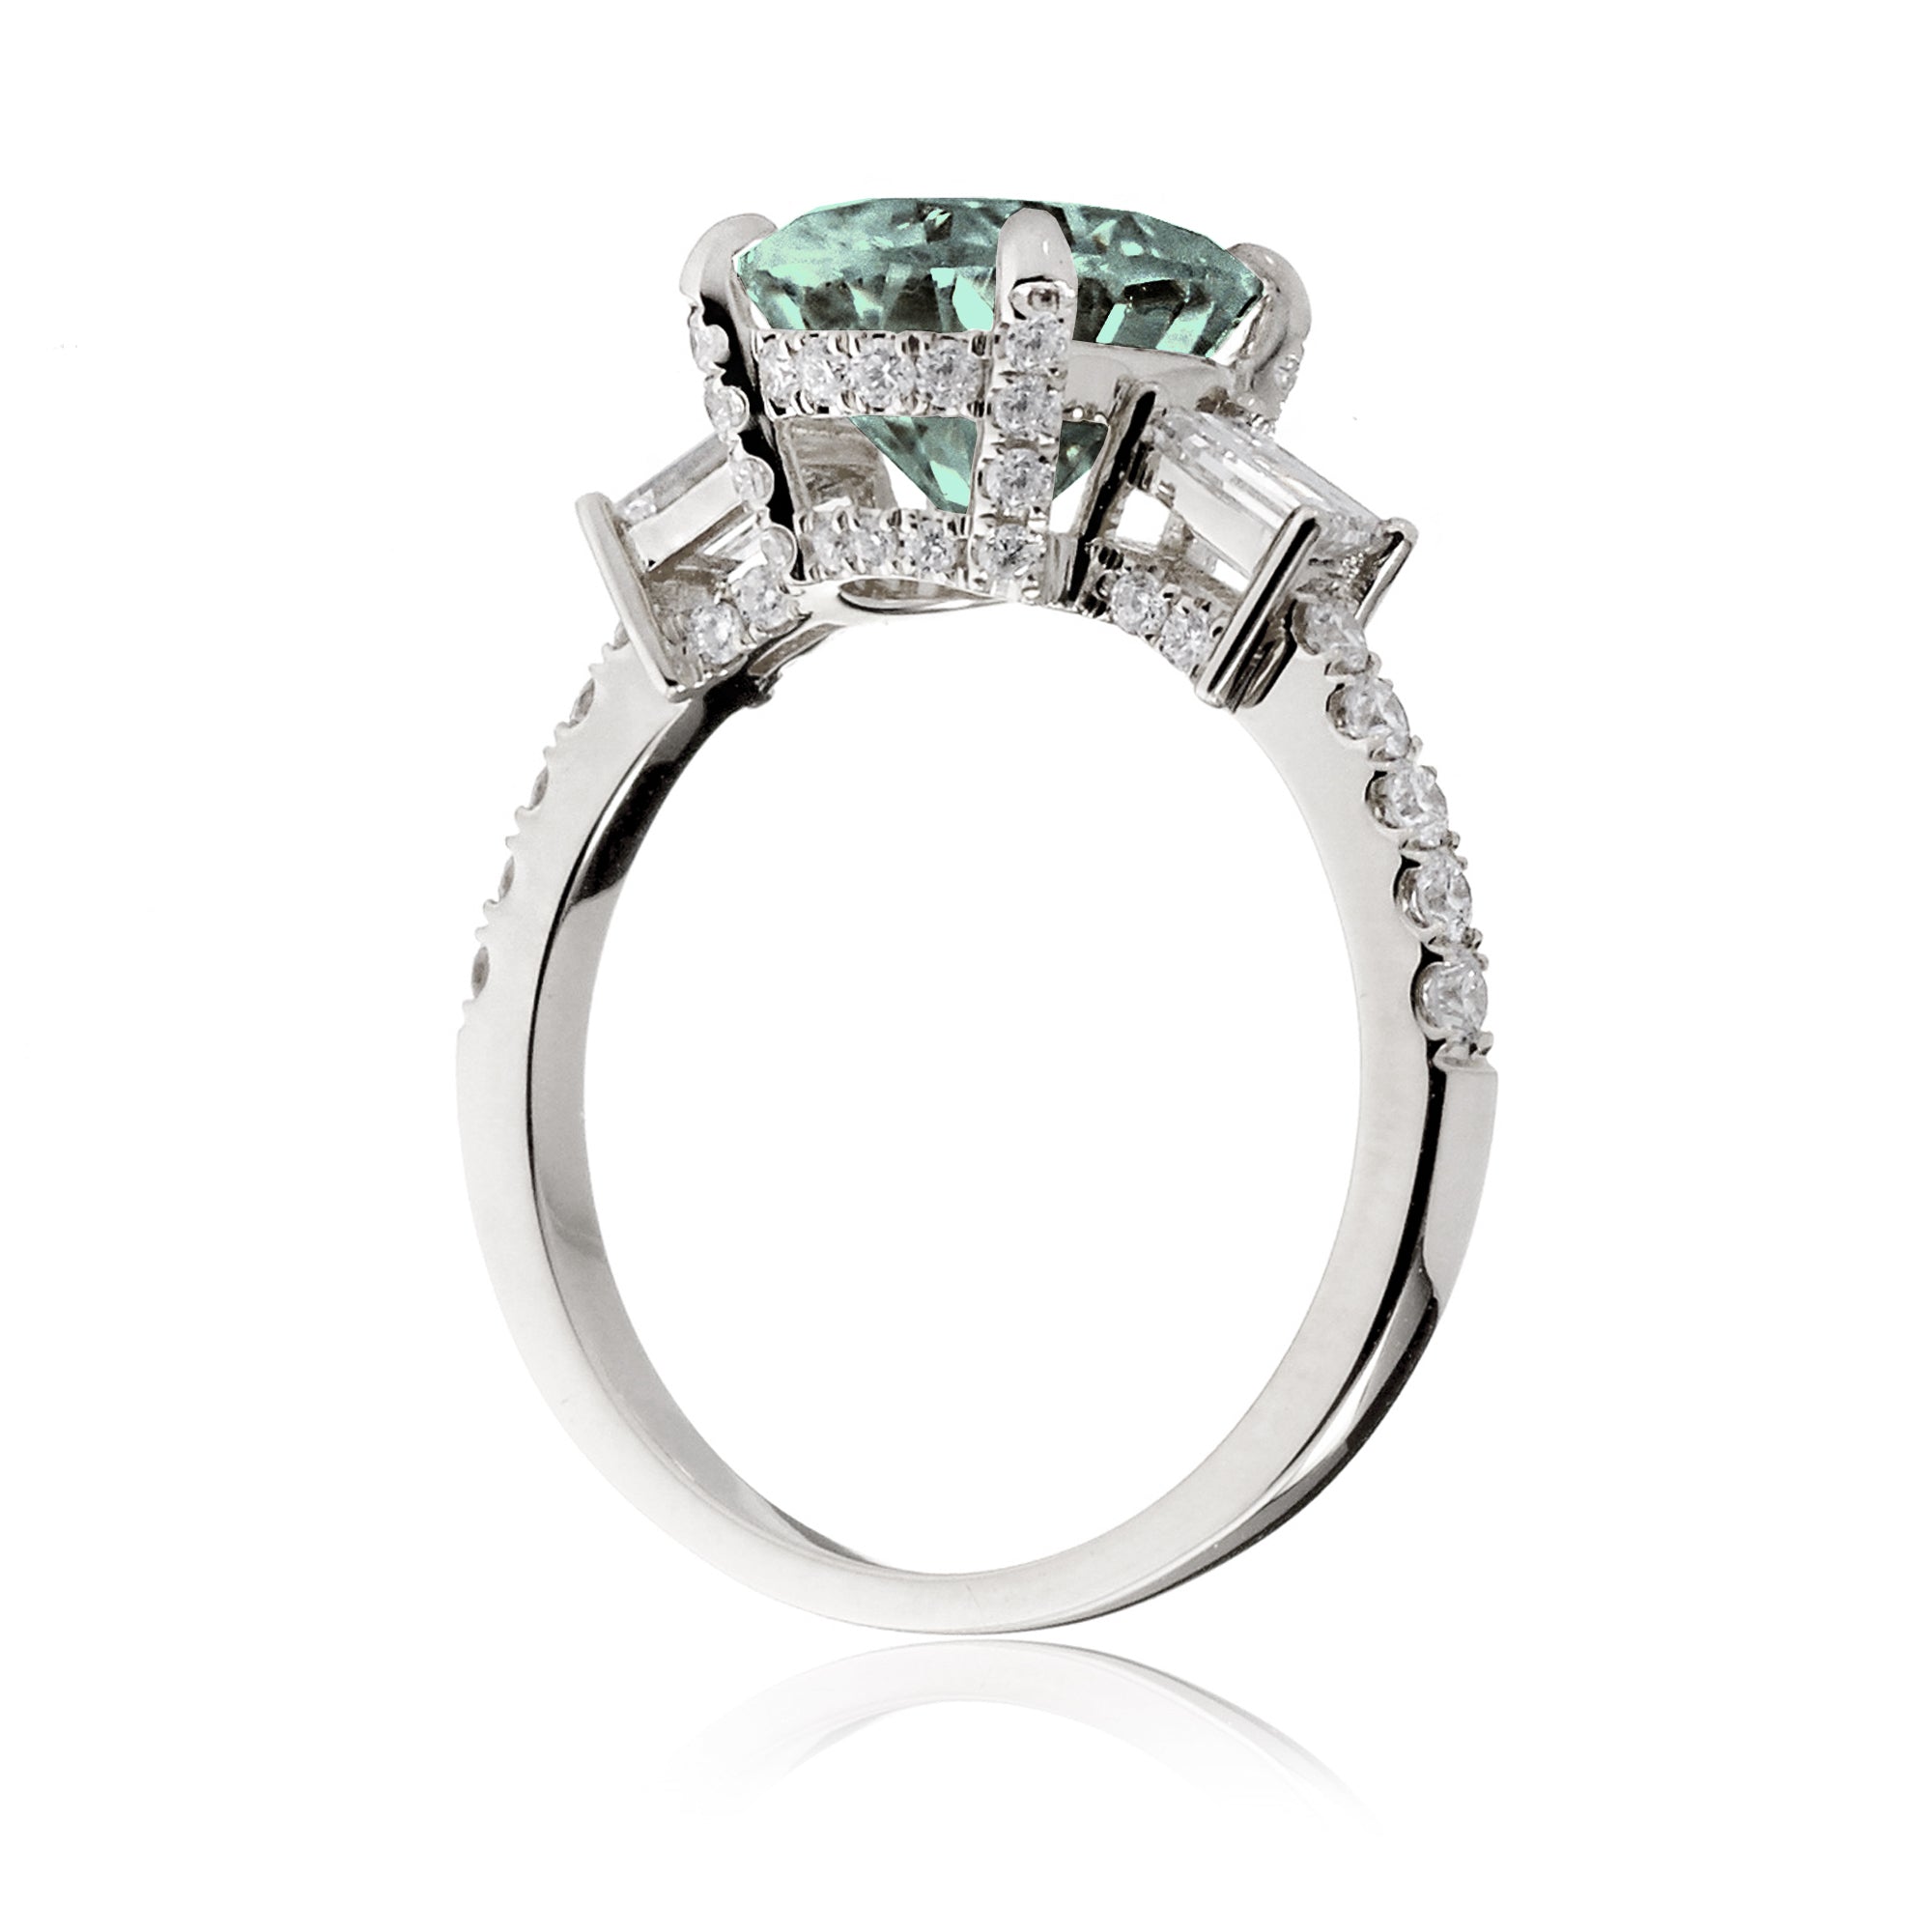 The Rey Round Green Sapphire Ring (Lab-Grown)